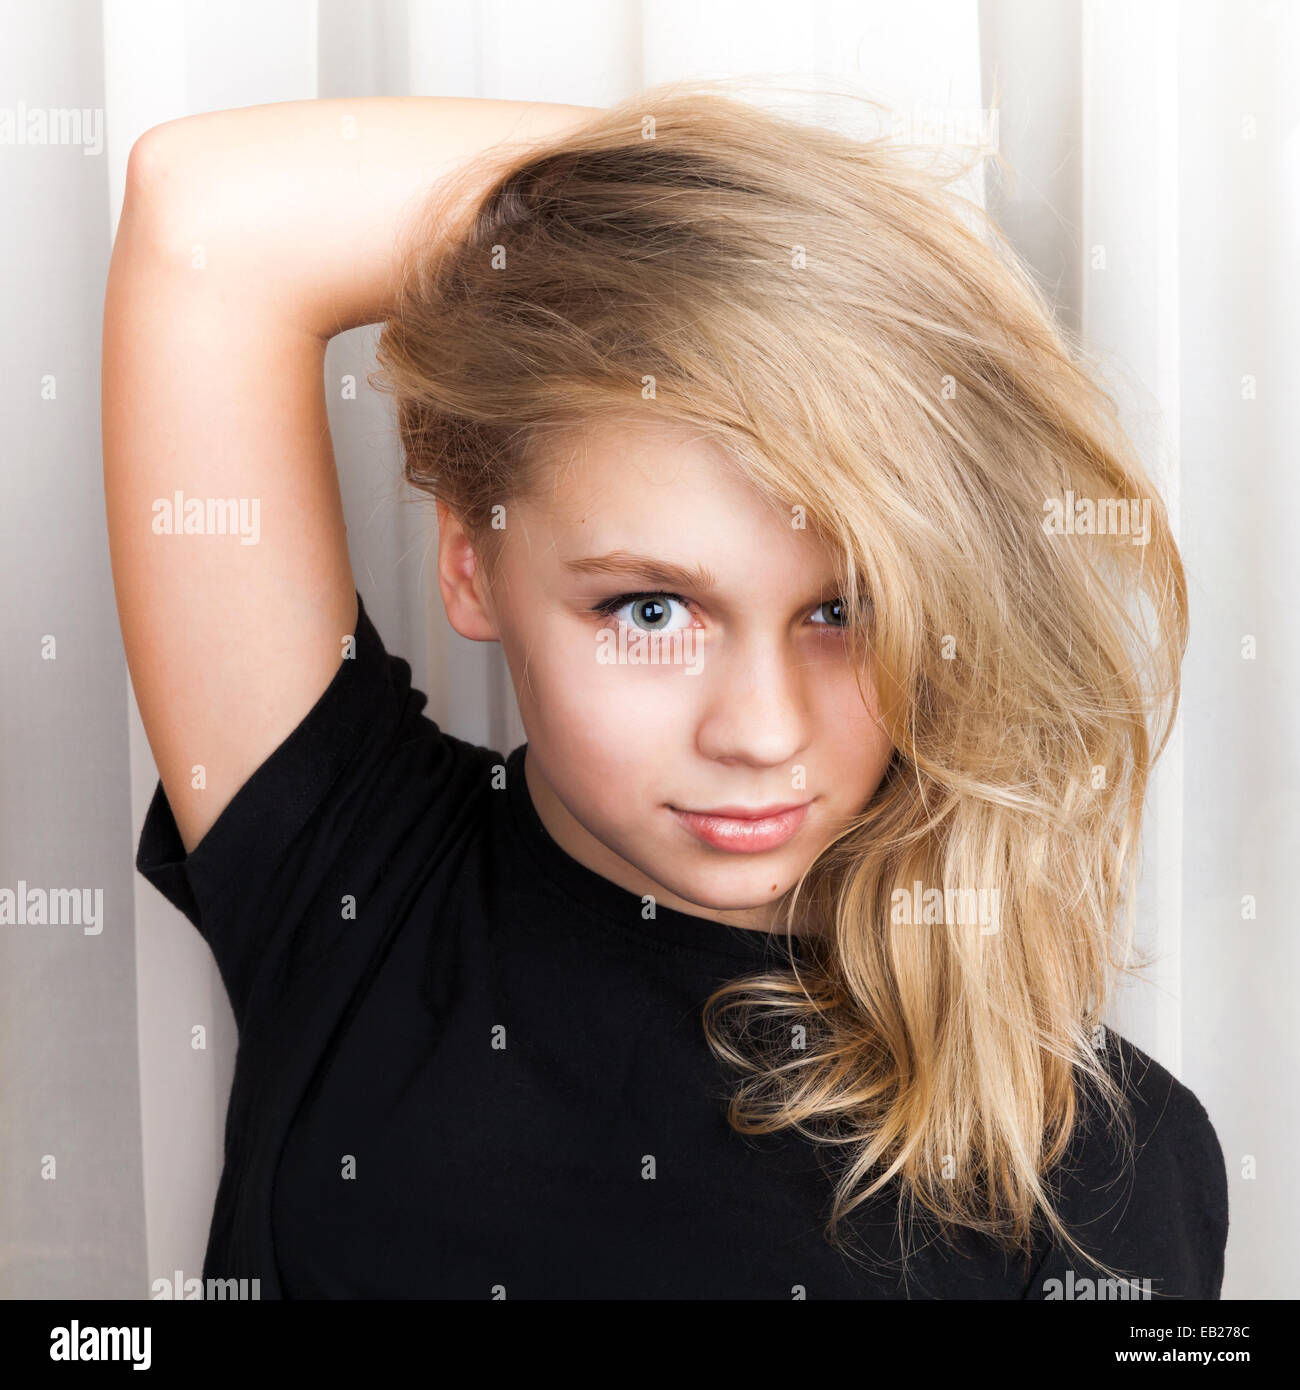 Smiling Caucasian girl with long blond hair, close up studio portrait Stock Photo